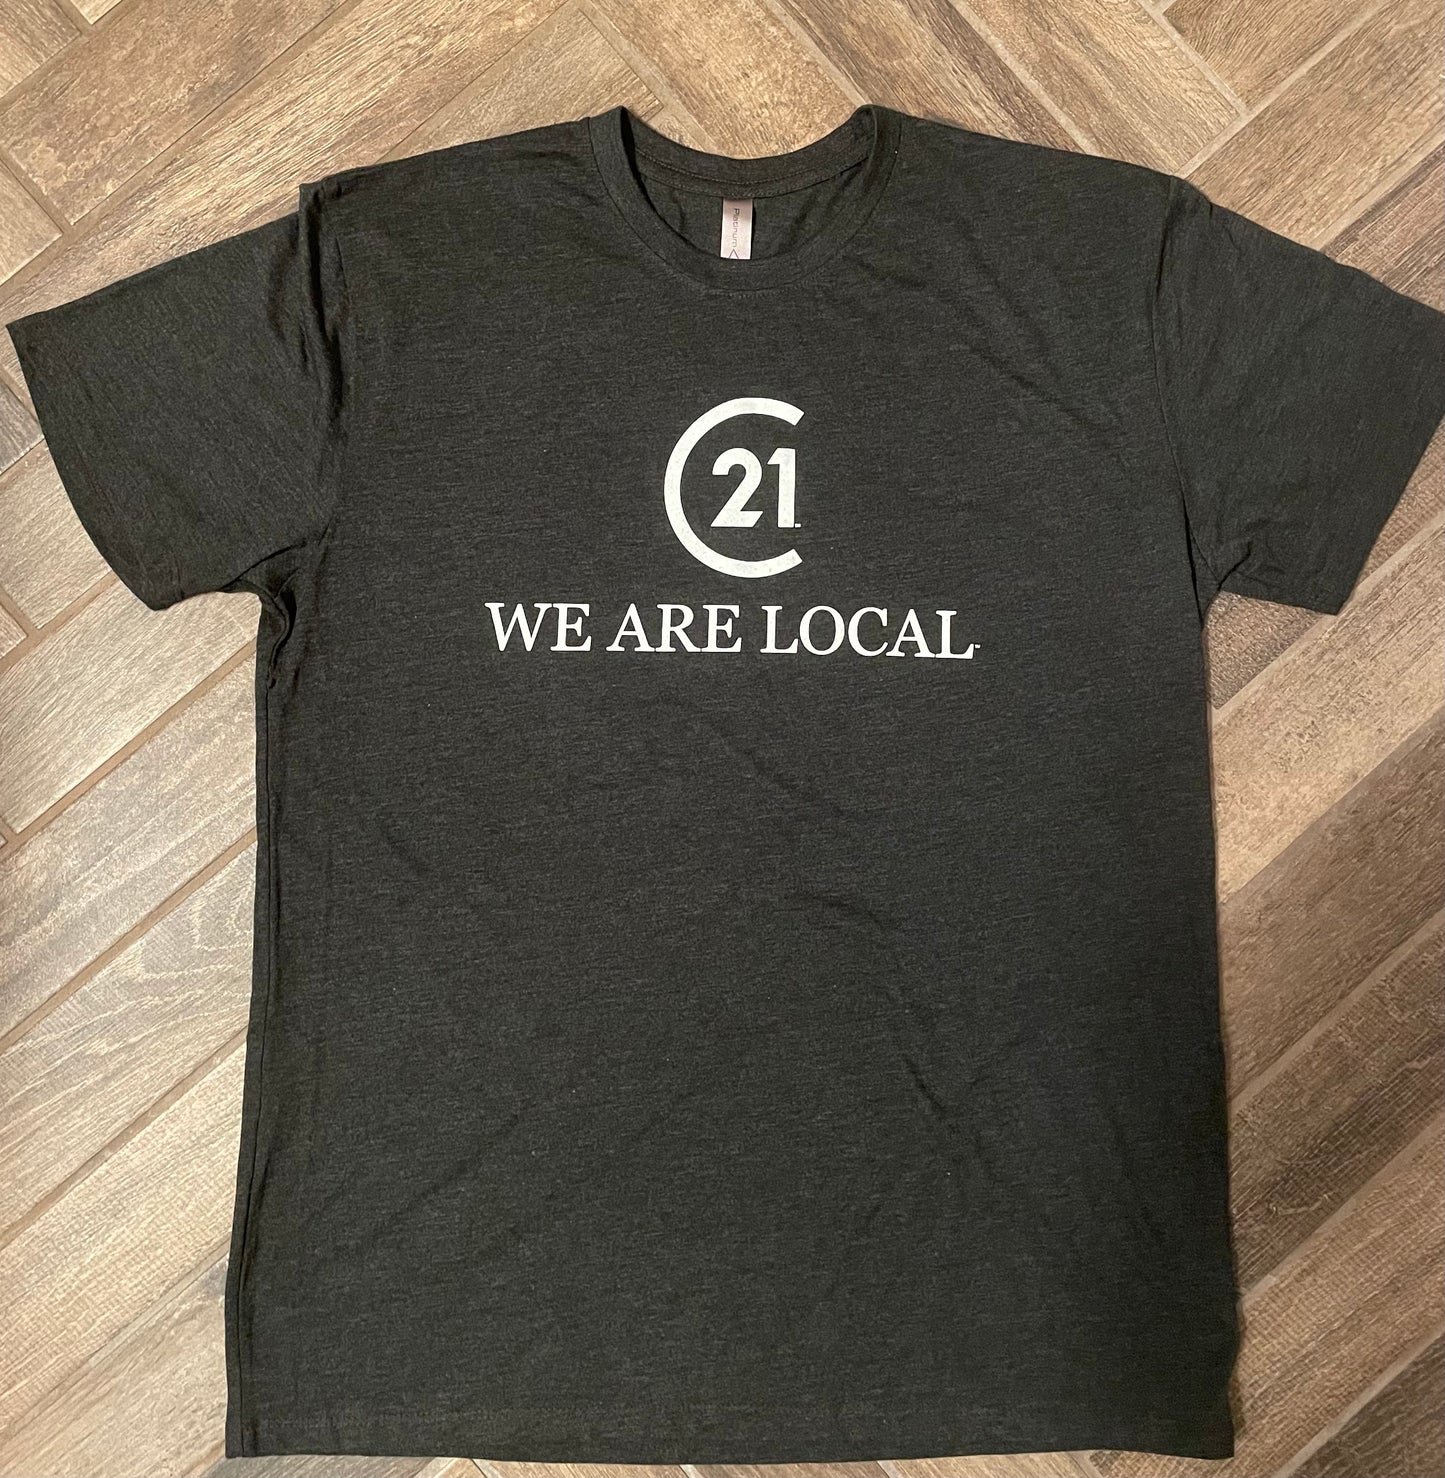 C21 WE ARE LOCAL WELCOME TO THE TEAM PACKAGE  ONLY $199